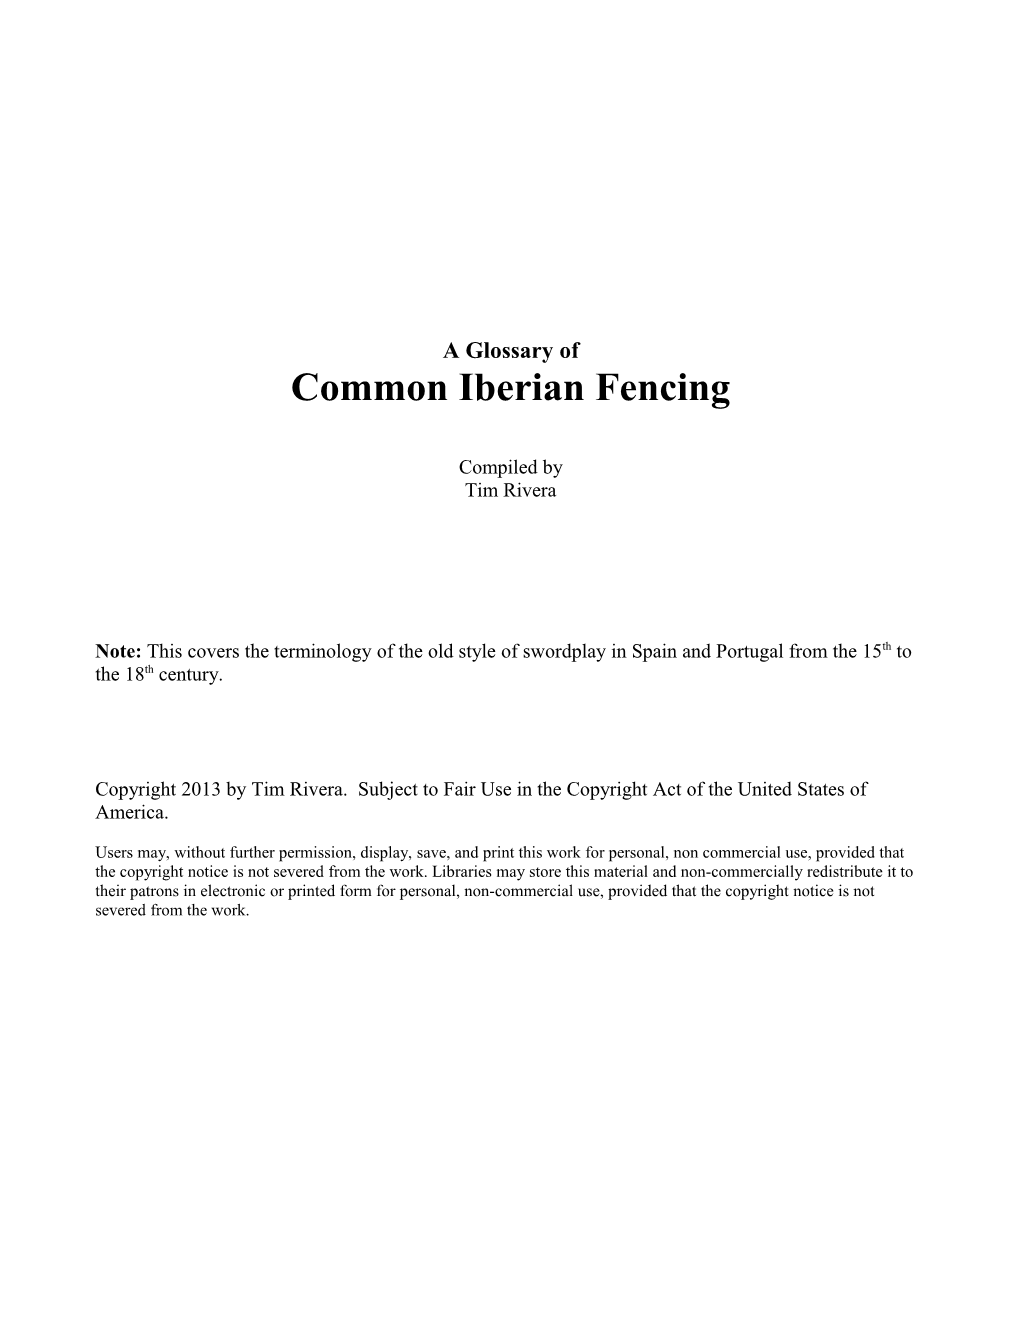 A Glossary of Common Iberian Fencing